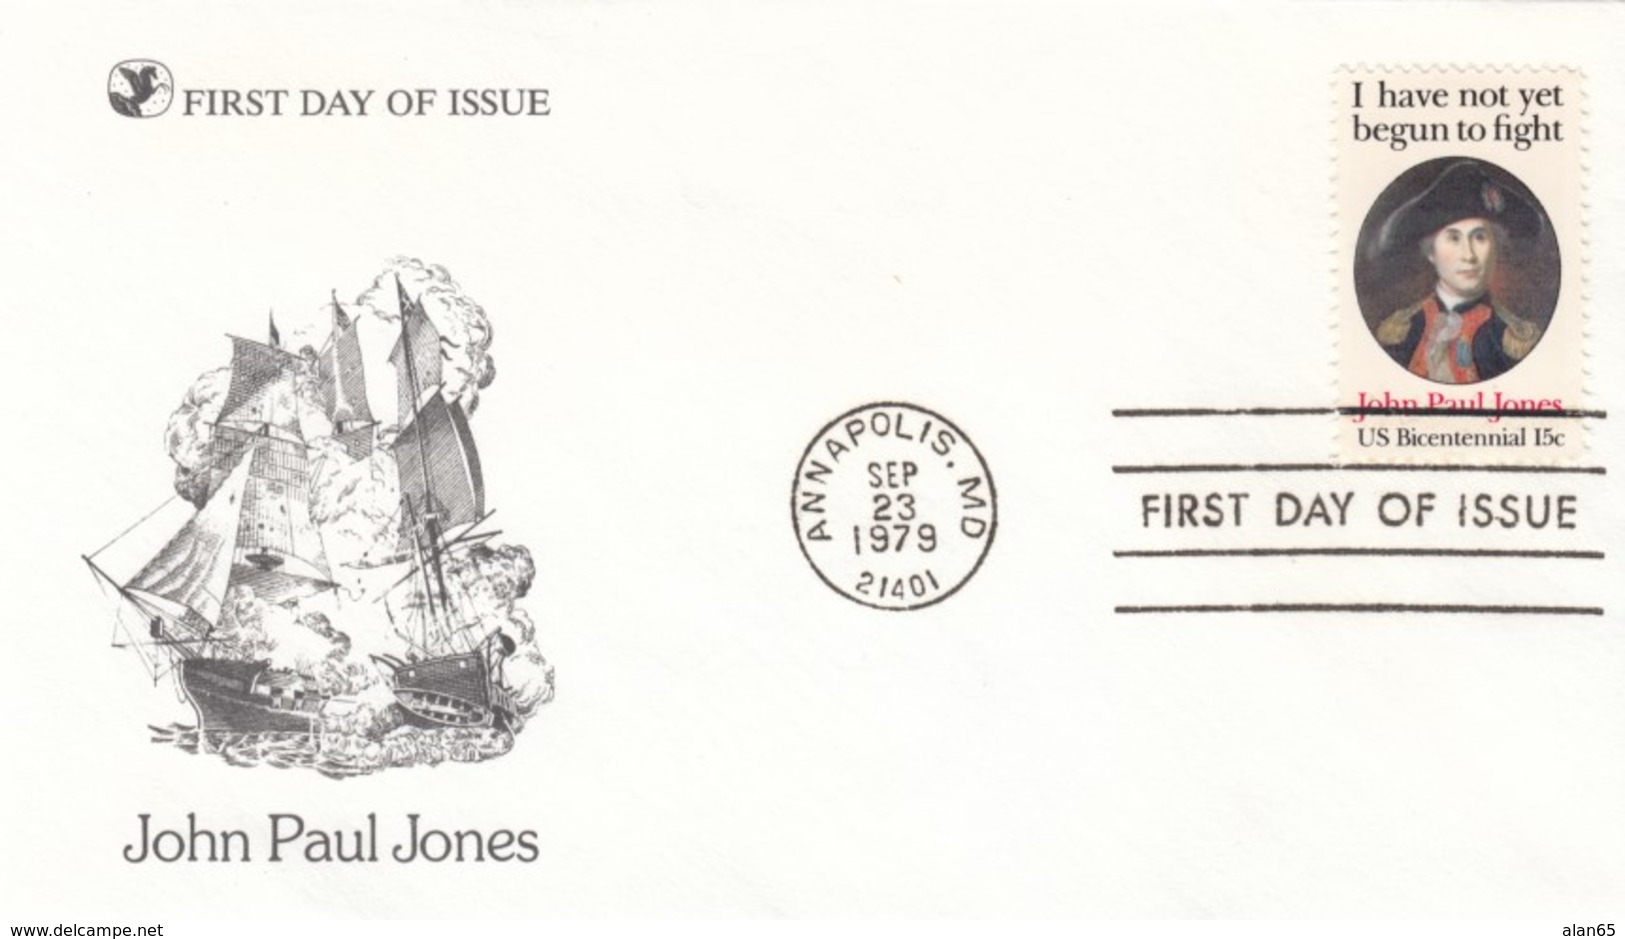 Sc#1789 John Paul Jones 15c Issue FDC Day Of Issue Cover, Annapolis MD 23 September 1979 Illustrated Cover - 1971-1980